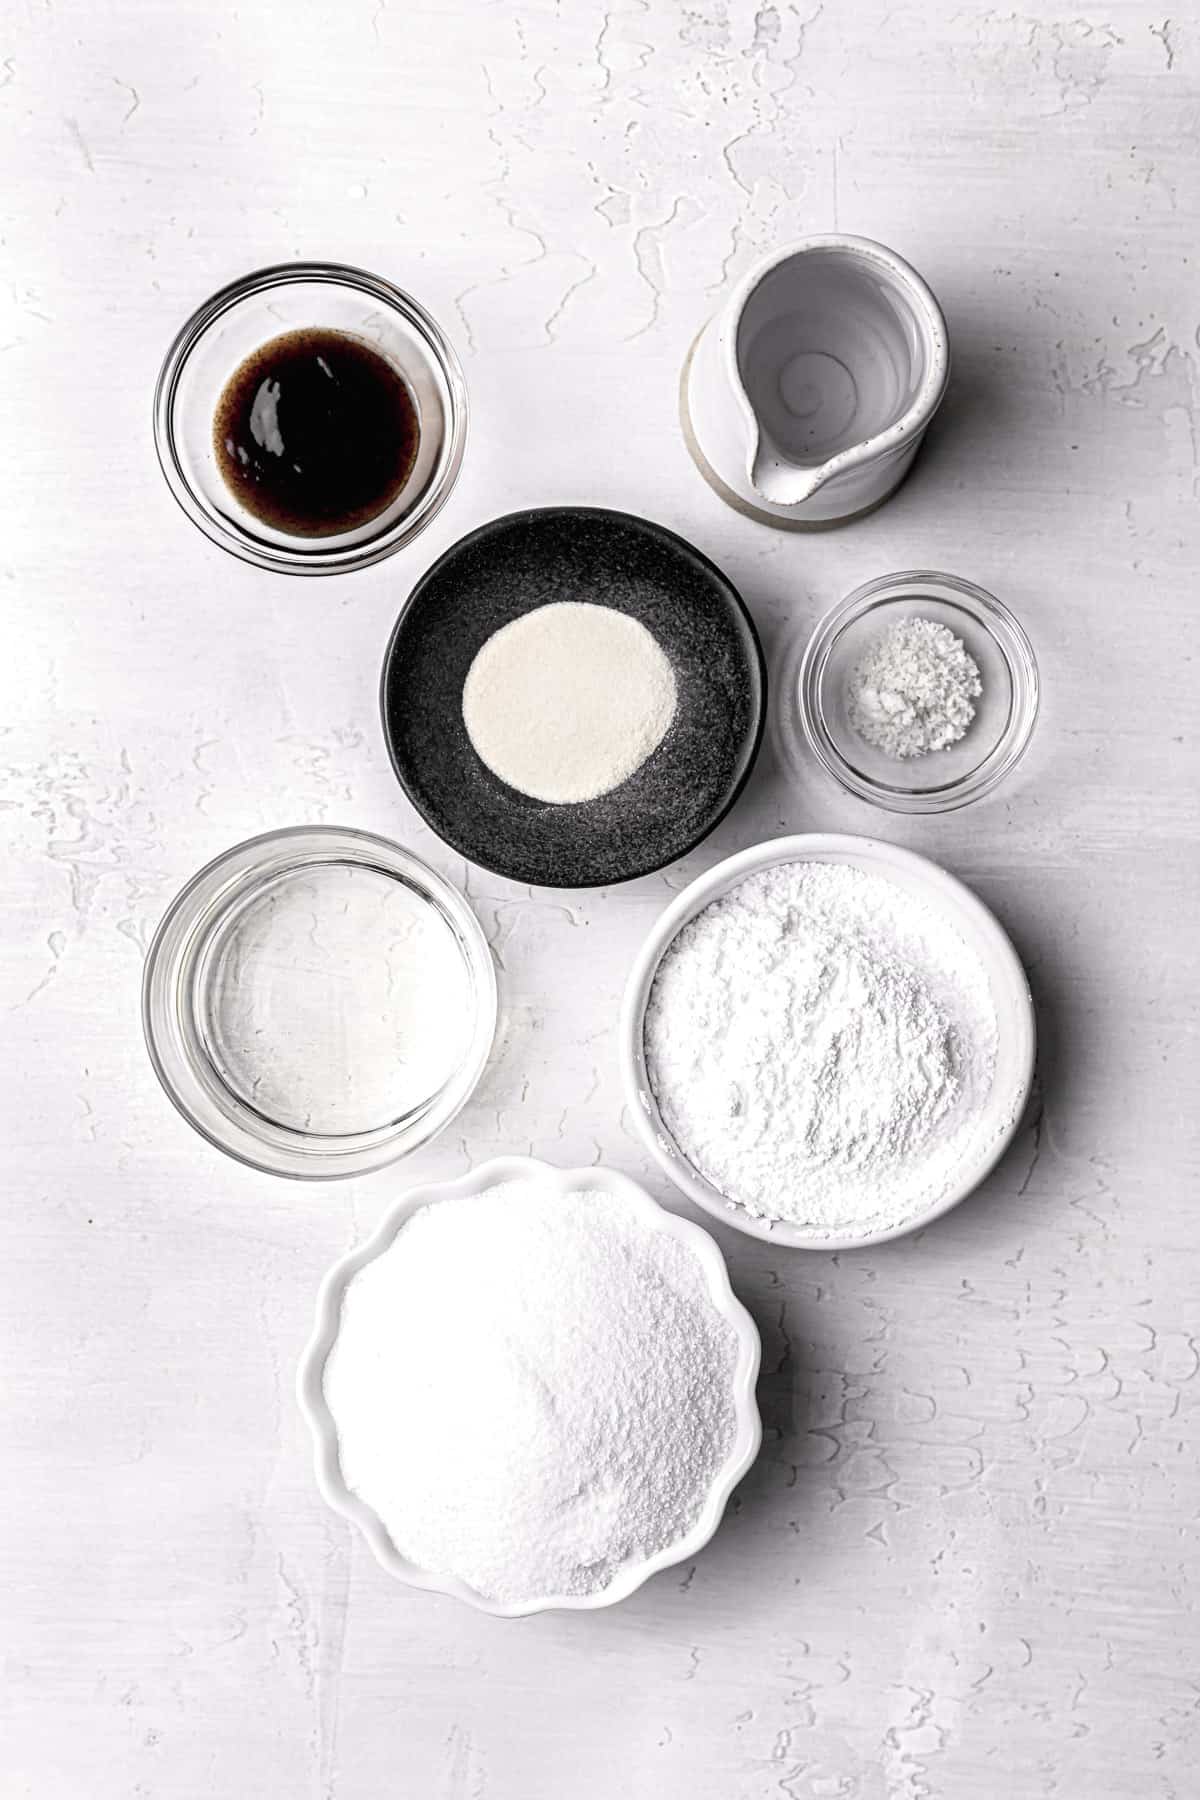 ingredients for homemade marshmallows.